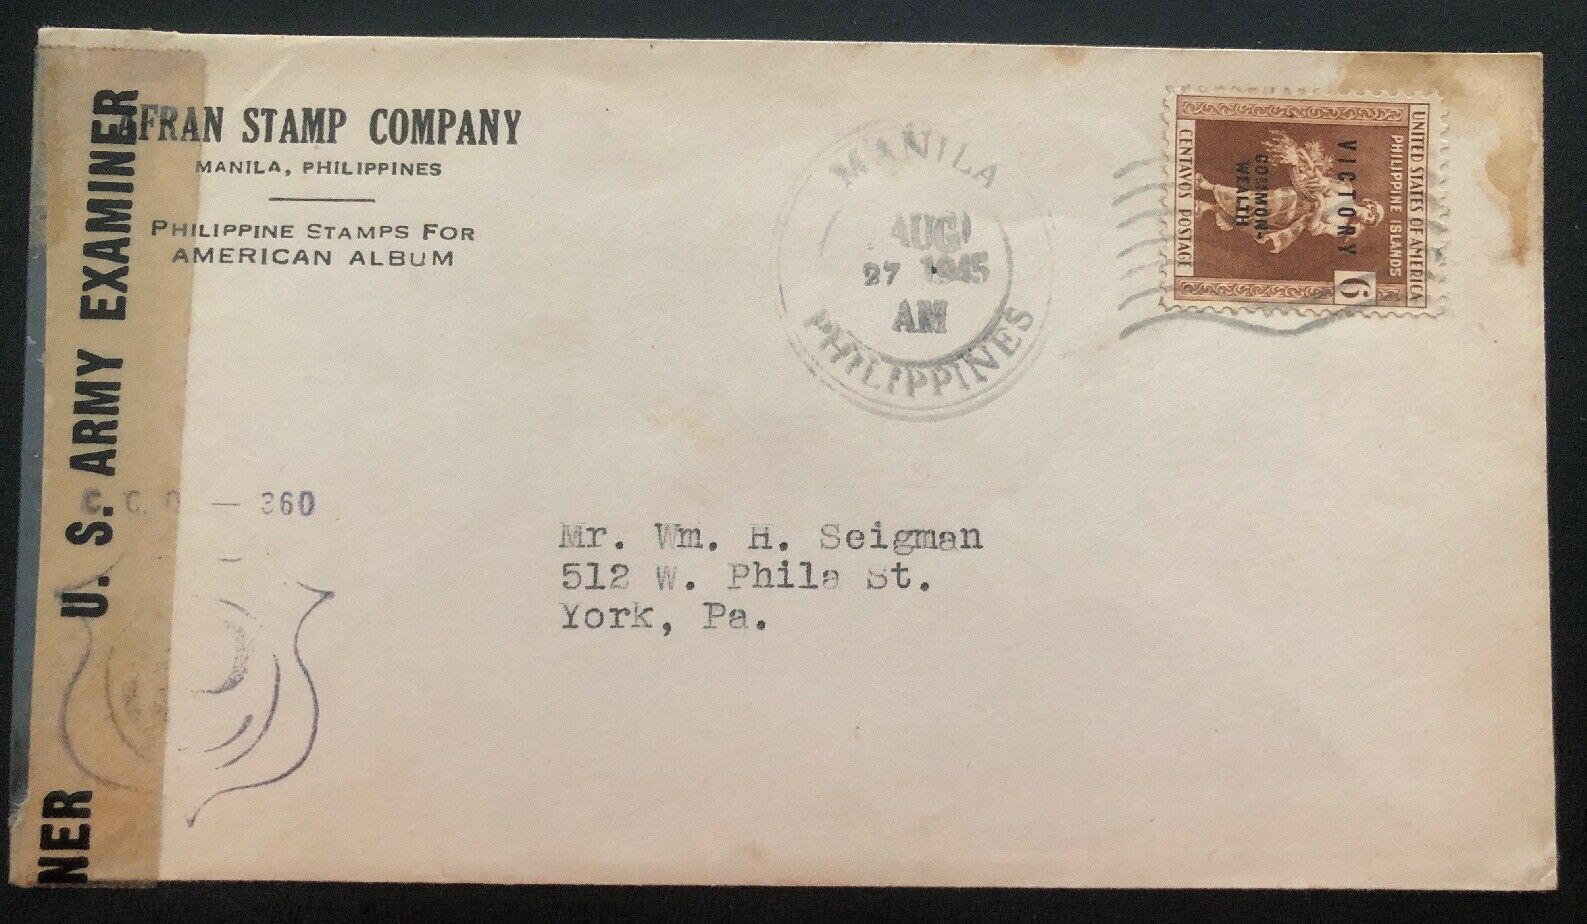 1945 Manila Philippines Afran Stamp Co Censored Cover To York PA Usa